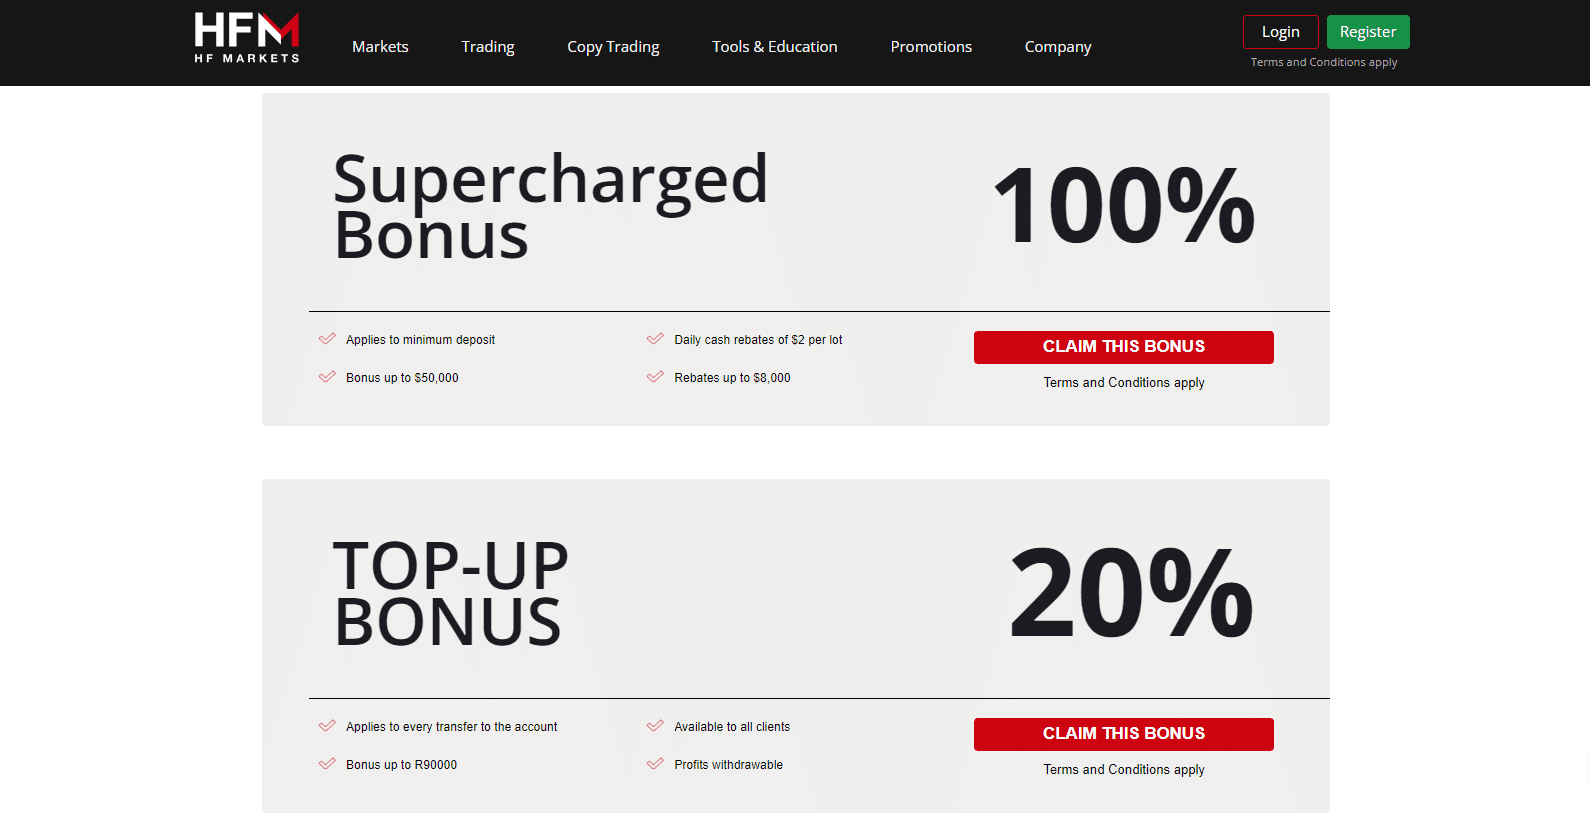 HFM Bonus Offers and Promotions